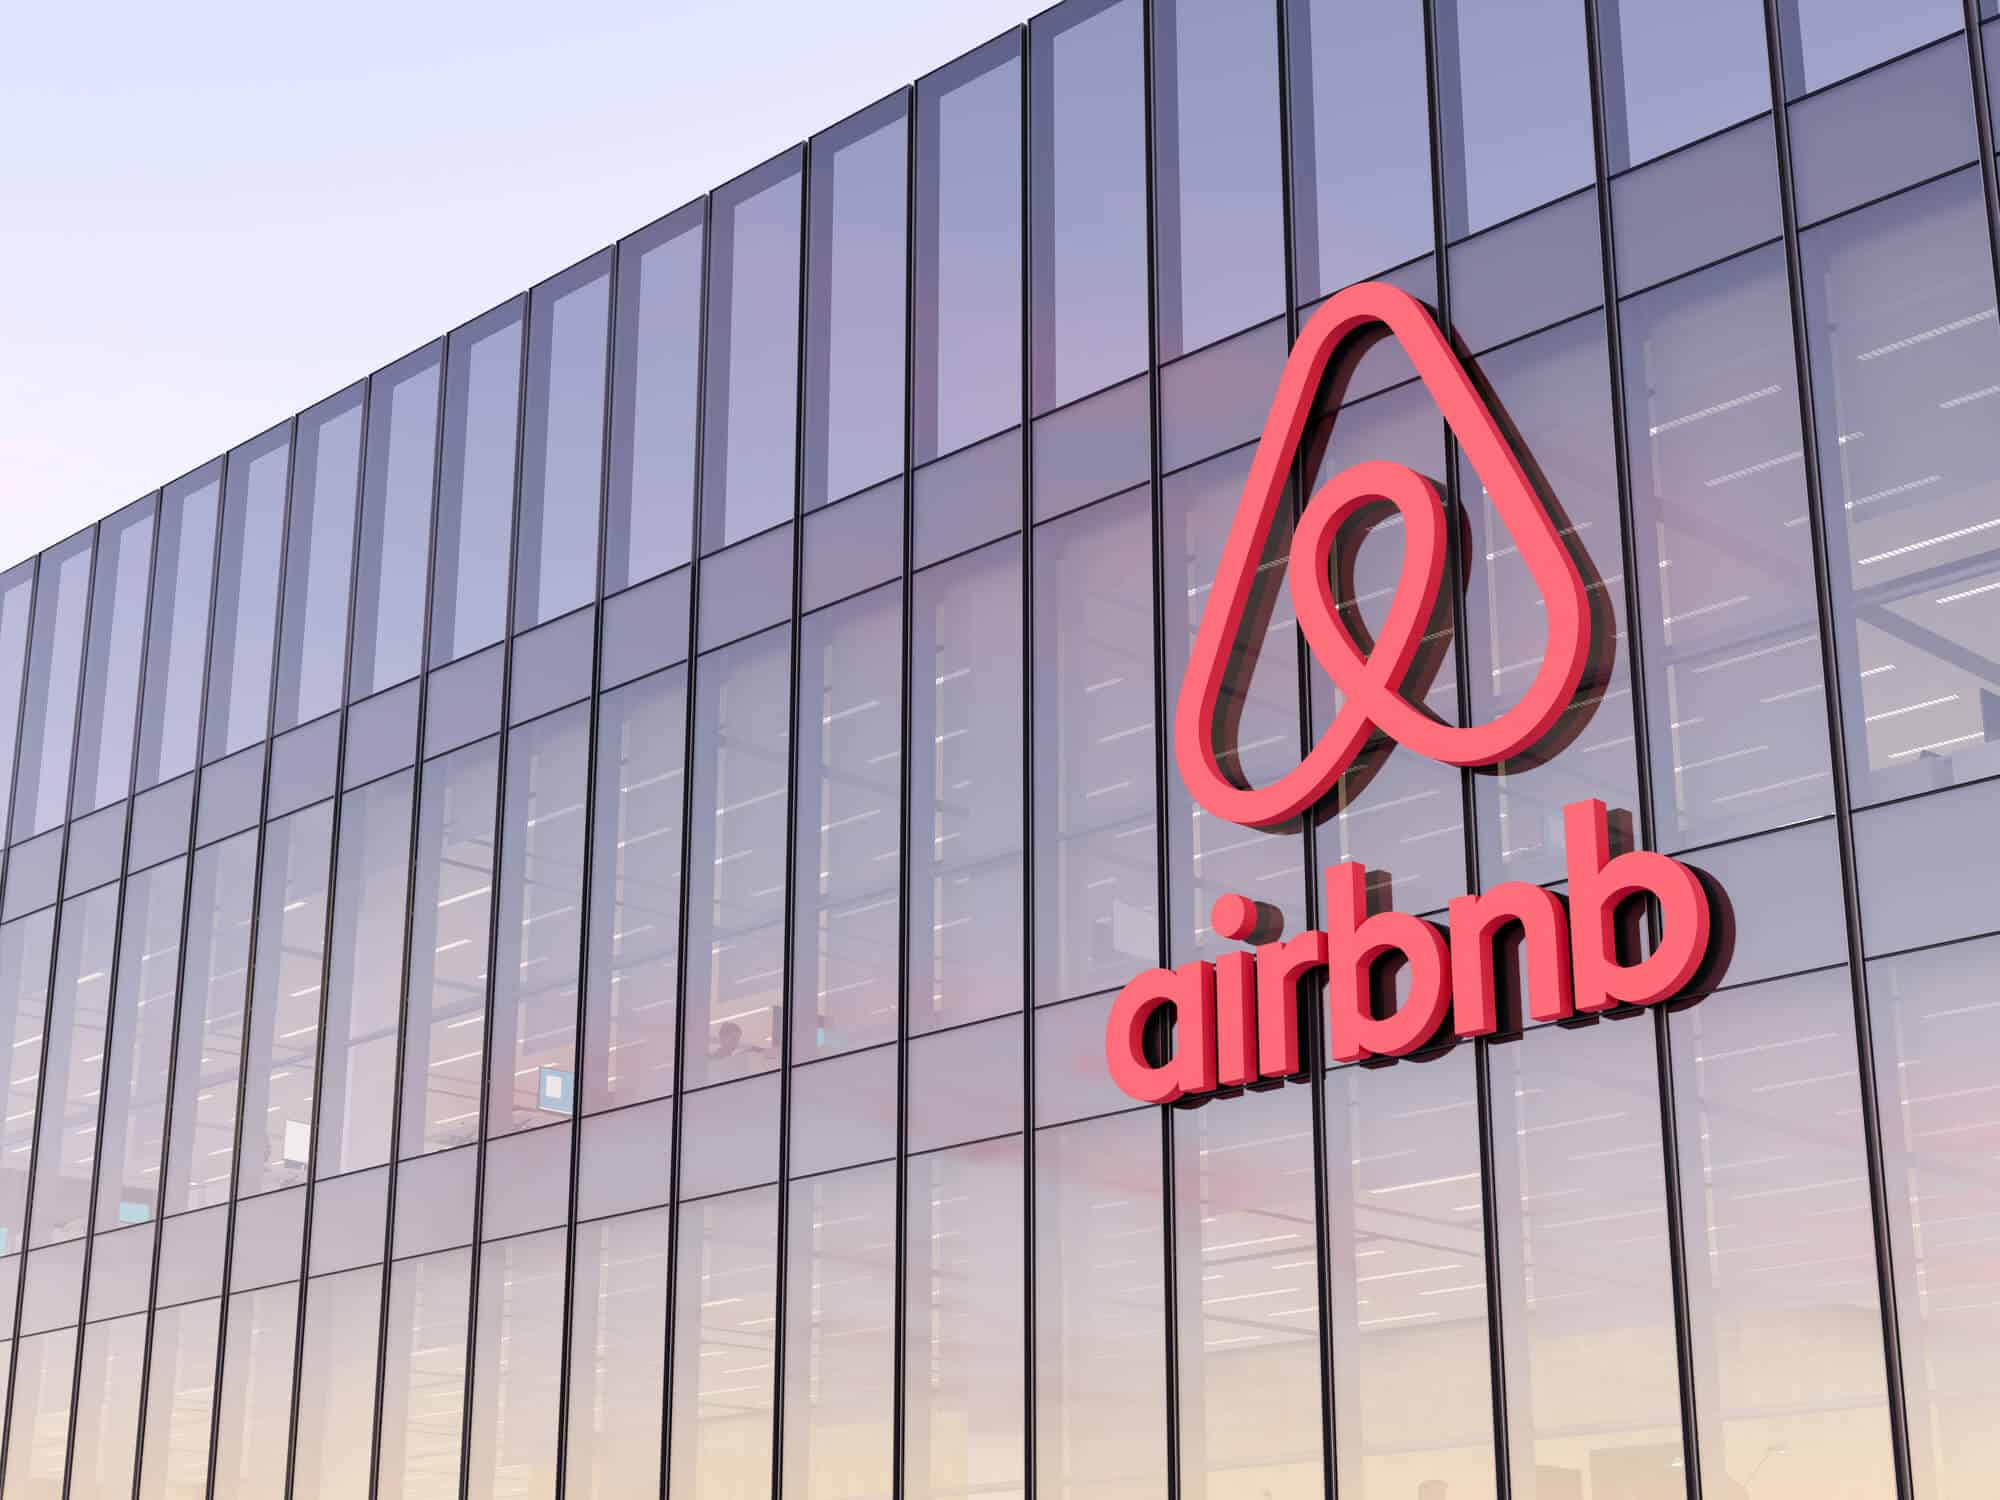 Airbnb’s Latest Move Ensures Guest Privacy With a Ban on Indoor Cameras